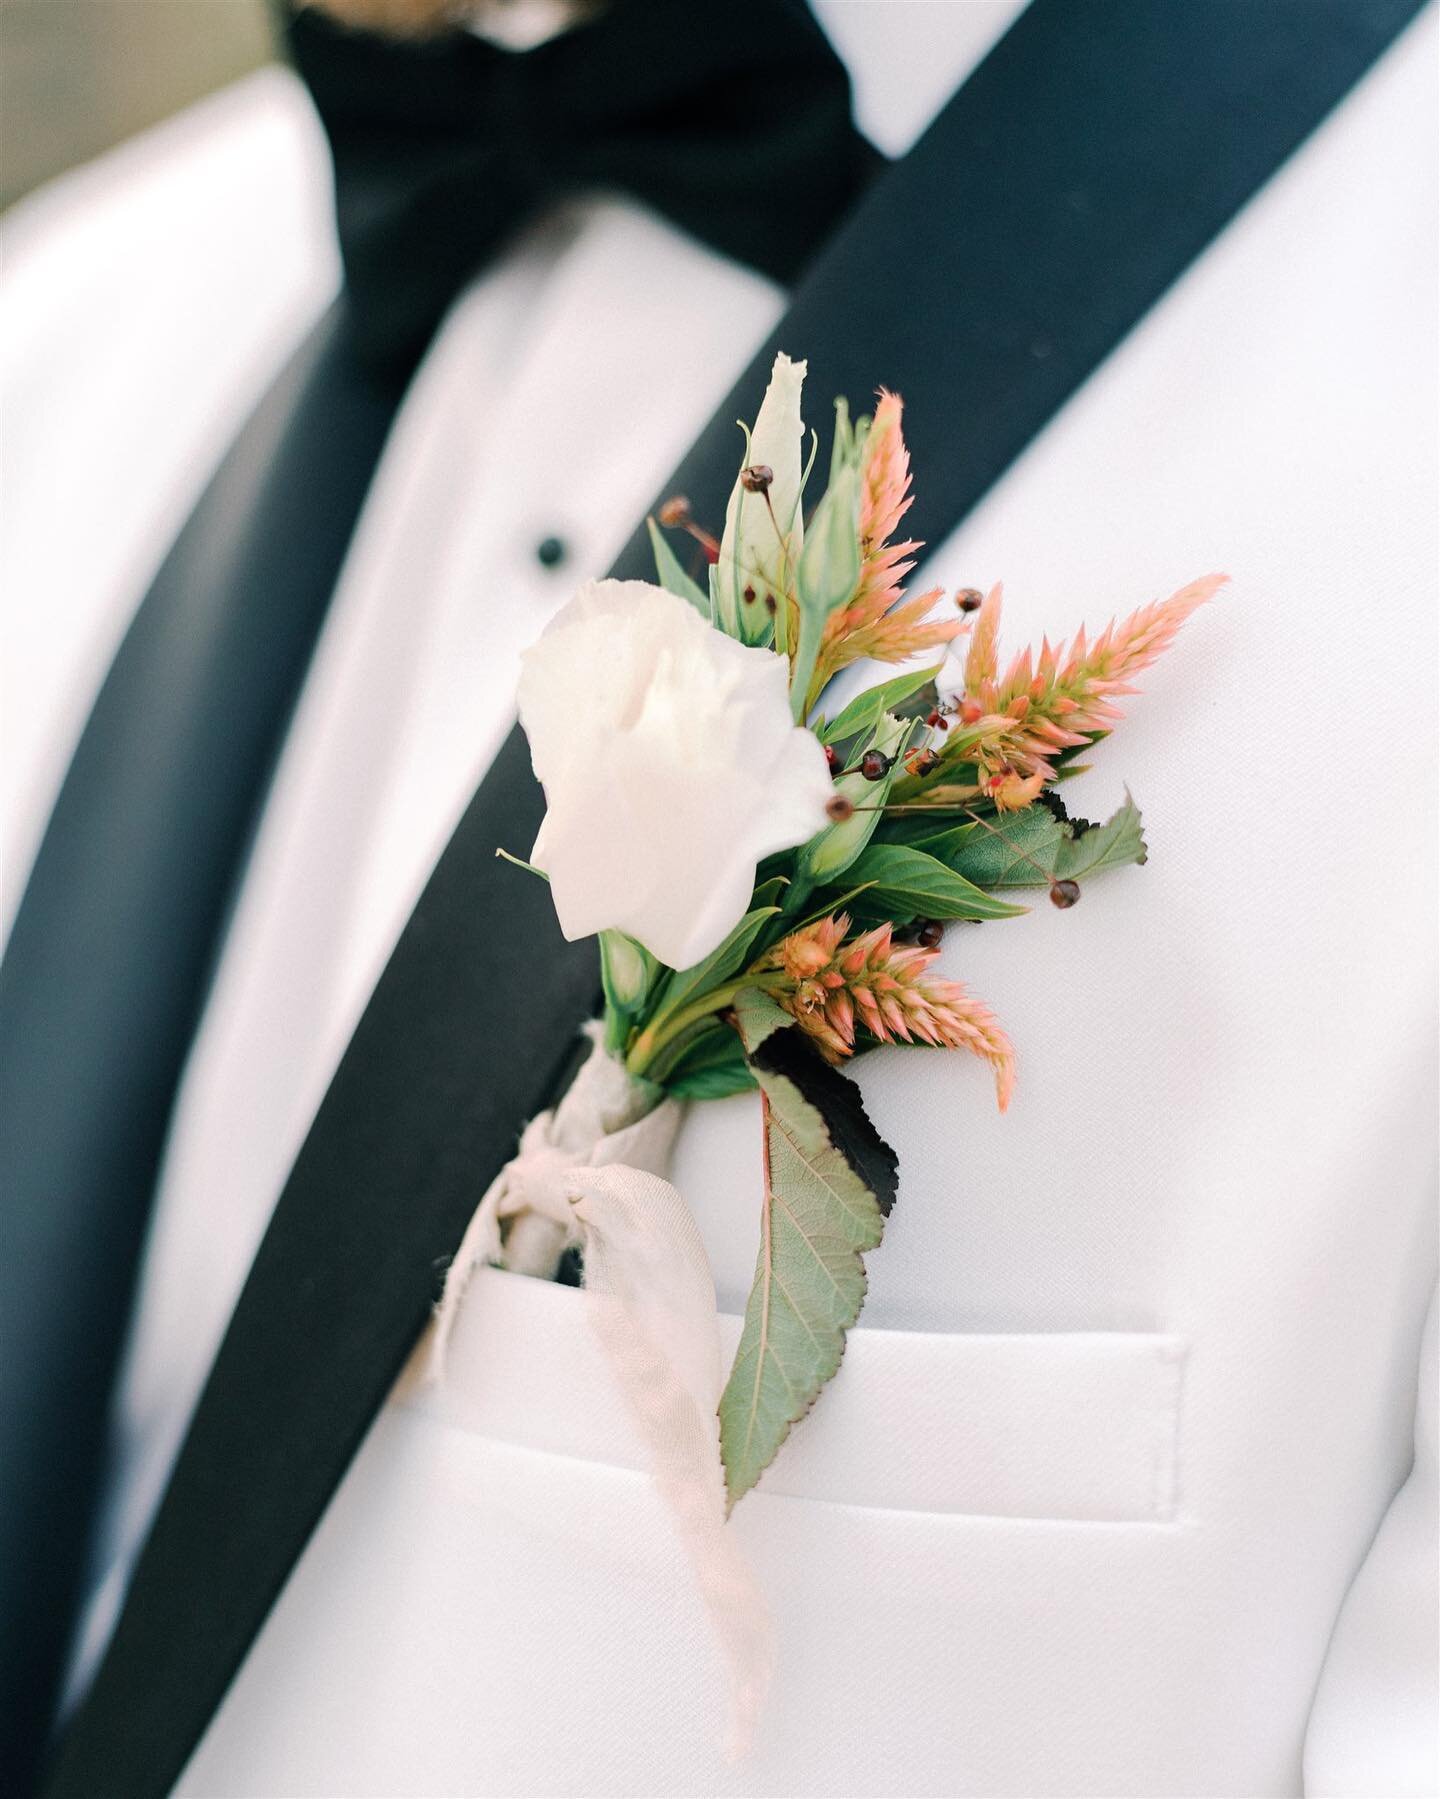 White tux, black lapels, and an ocean- coral inspired boutonniere.